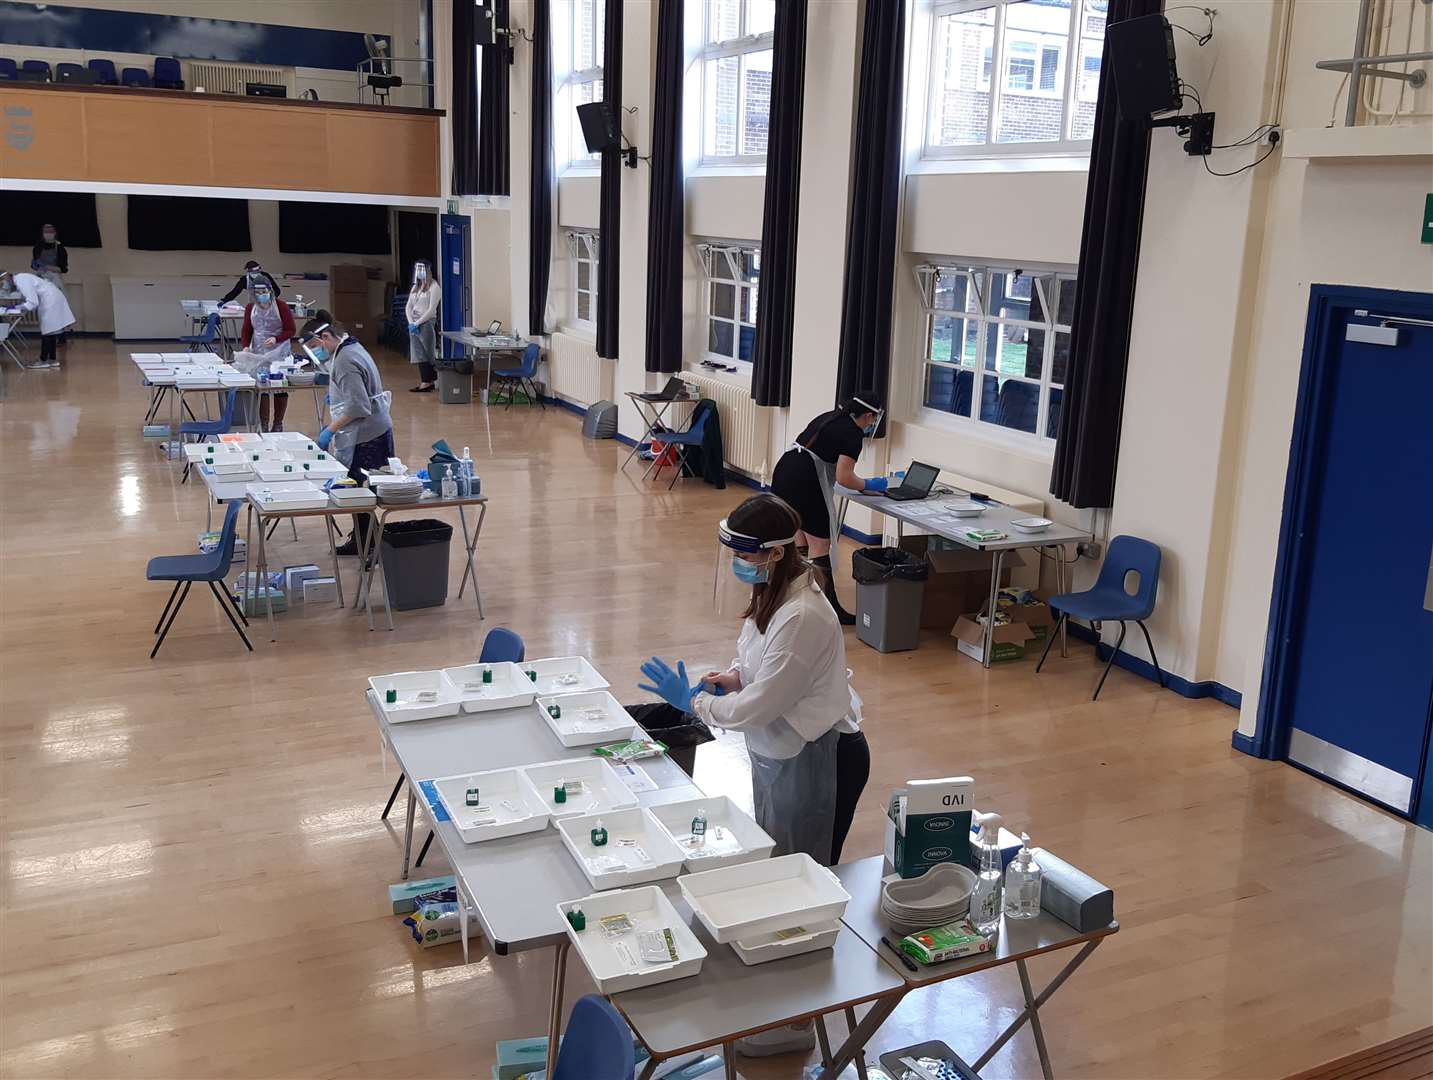 Maidstone Grammar School for Girls has set up a testing site in its school hall